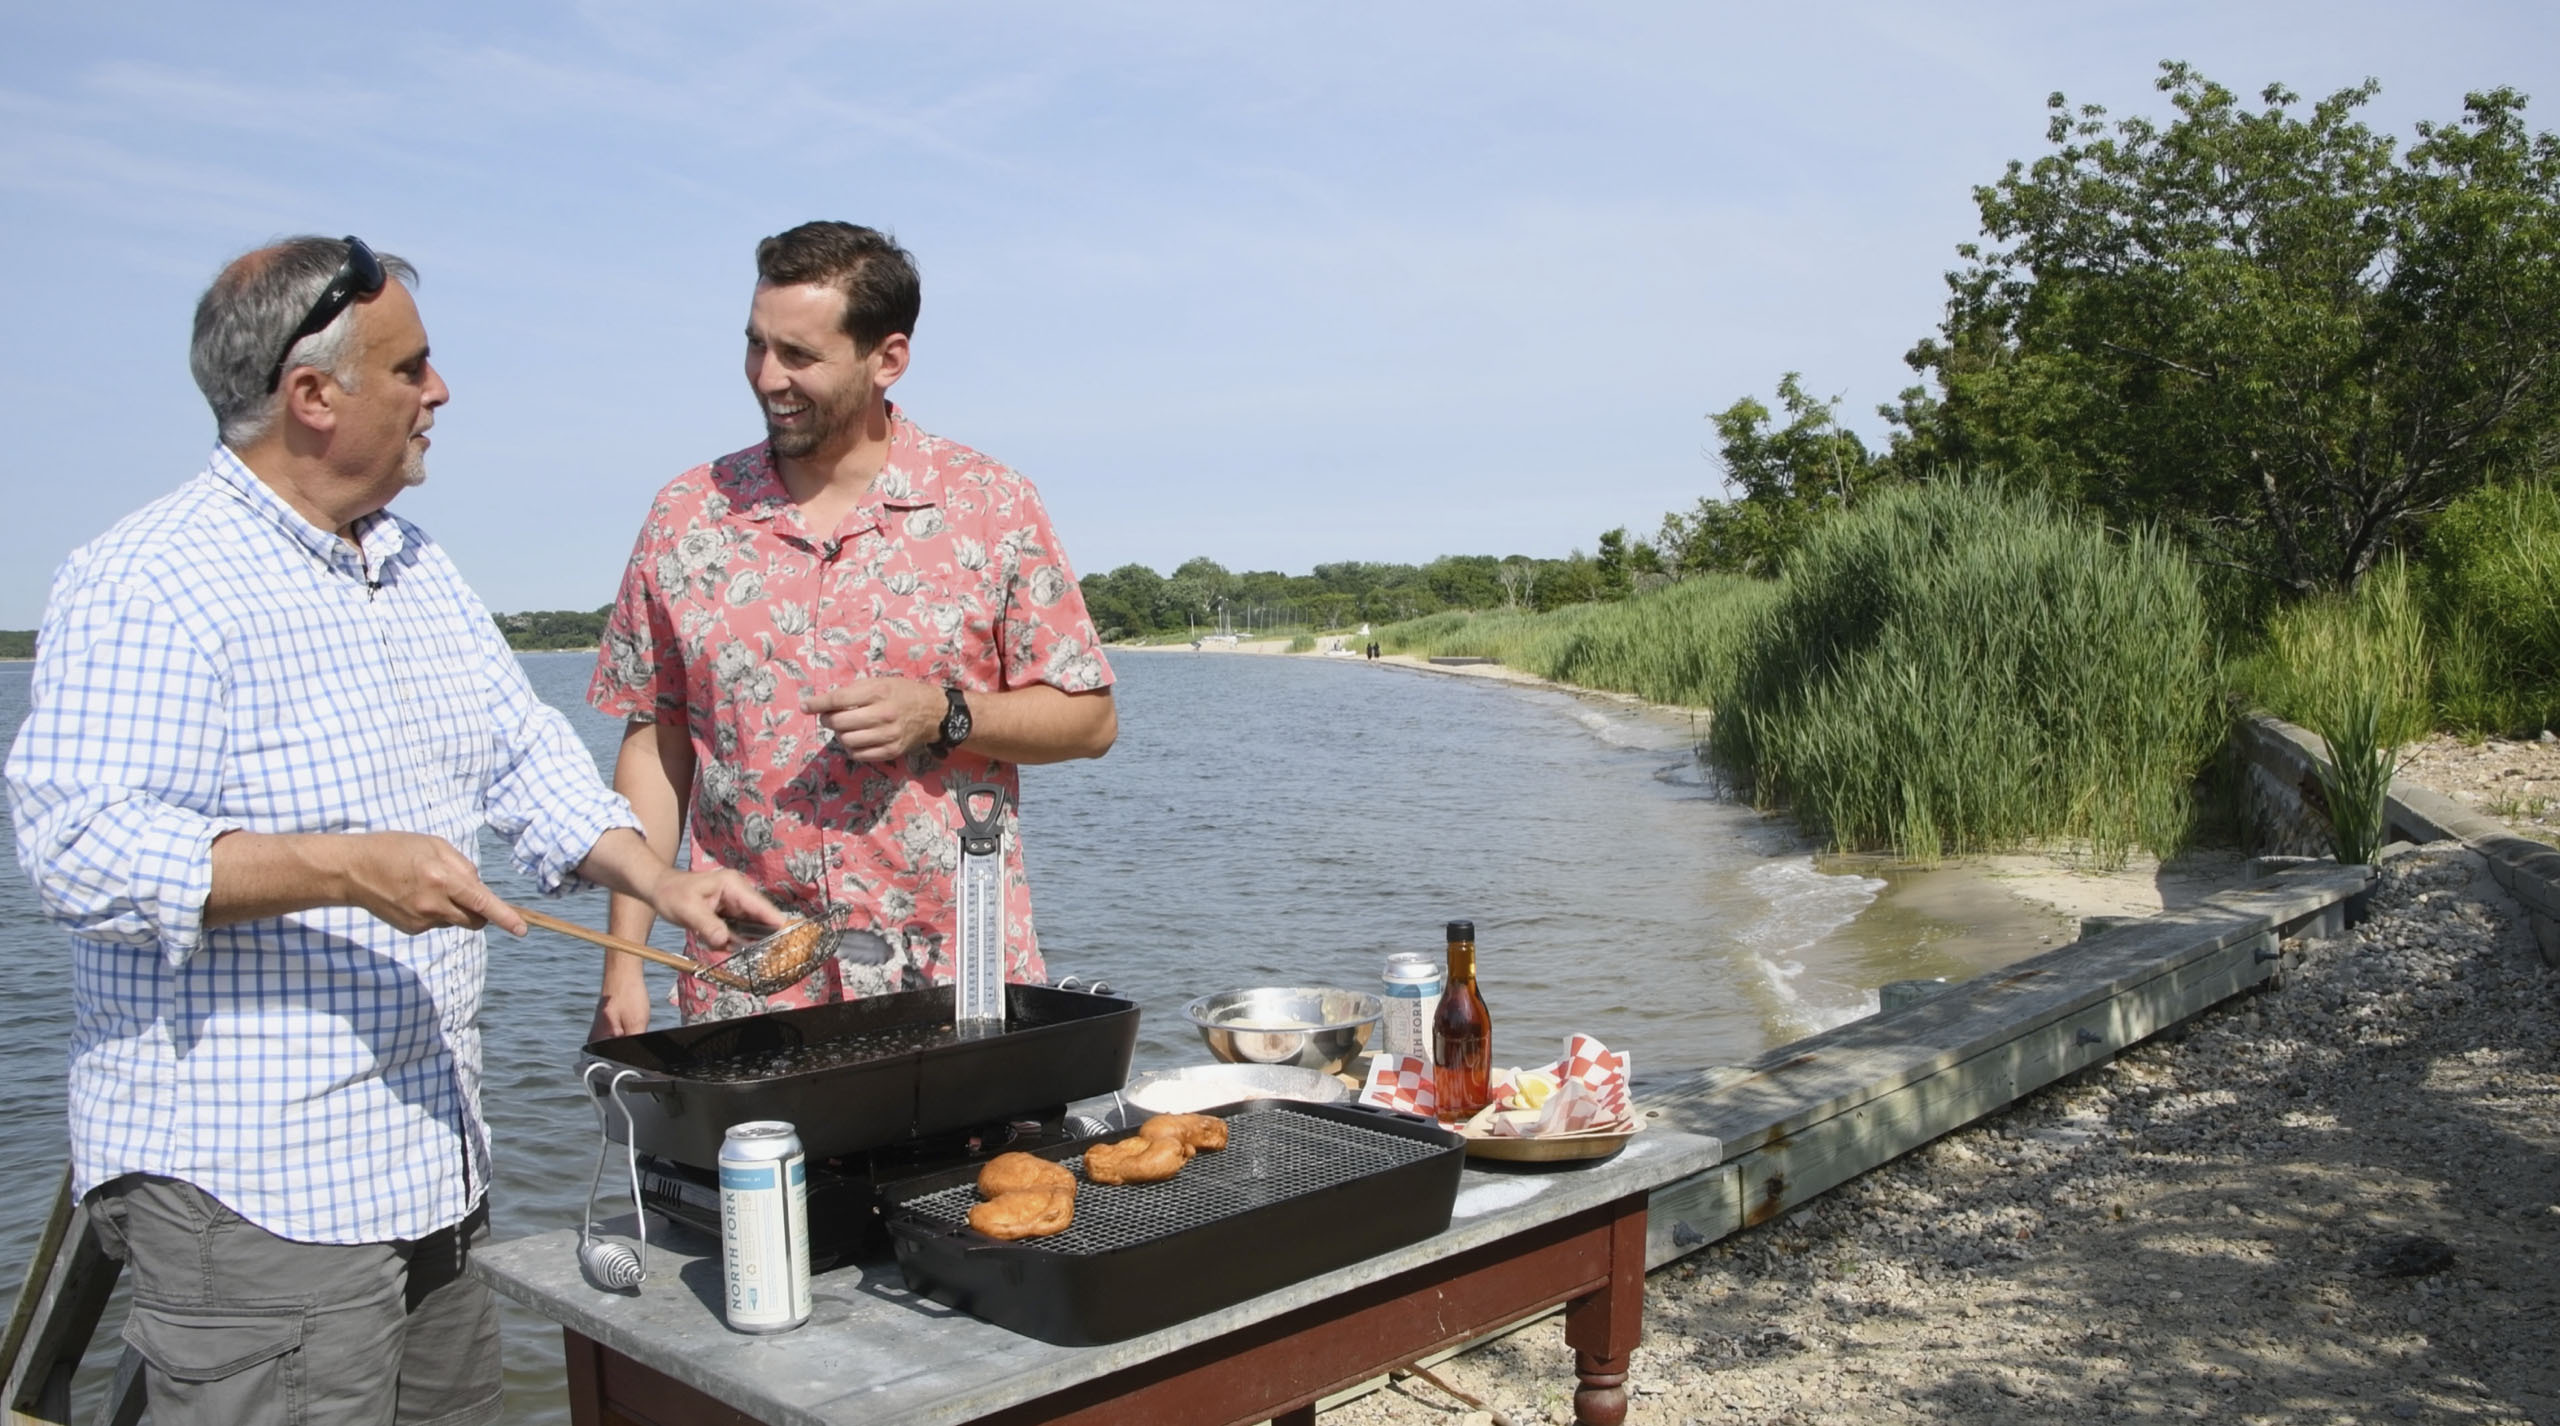 Chef George Hirsch and Alex Goetzfried cooking waterside at Cormaria in Sag Harbor.